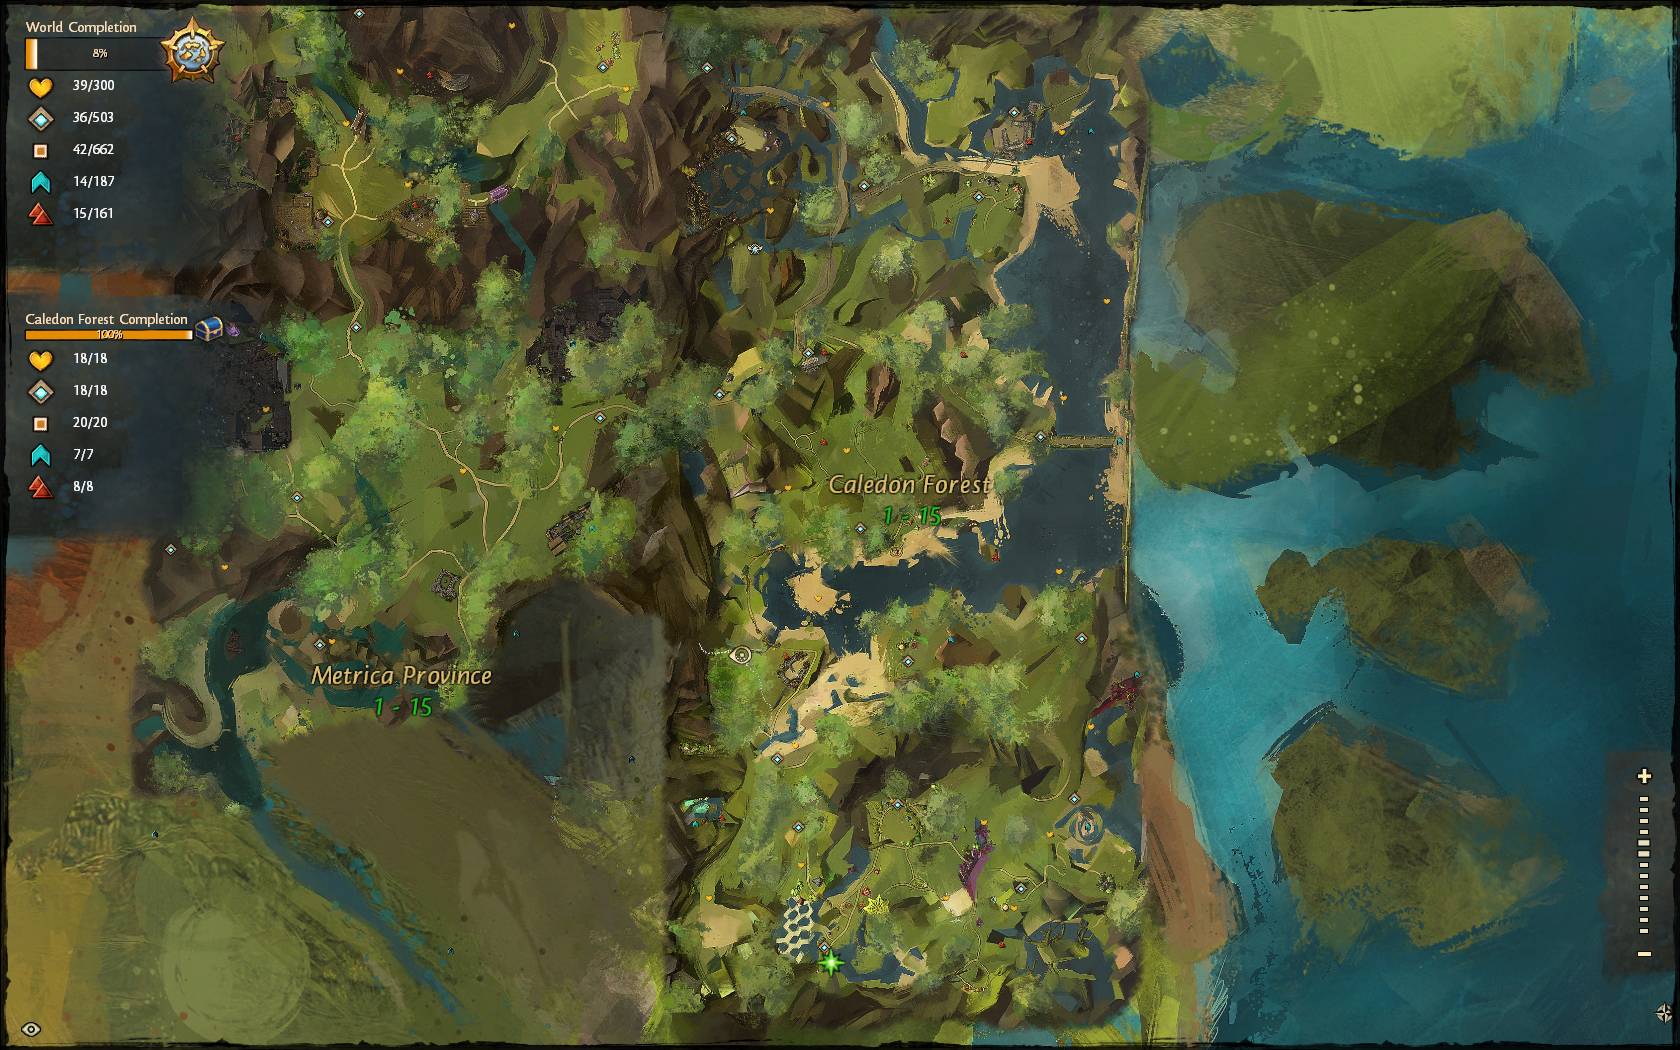 Caledon forest map